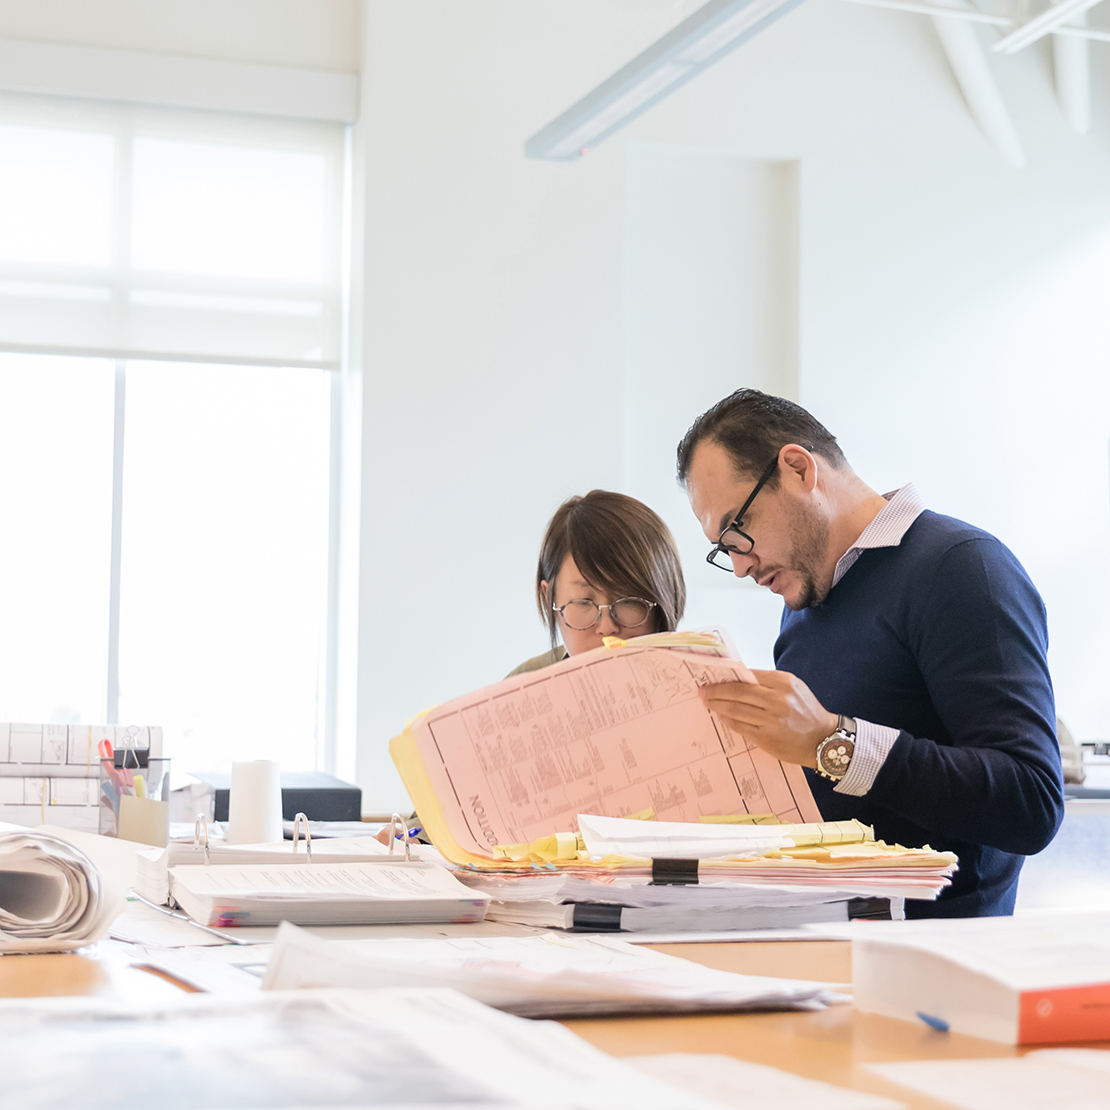 The post occupancy evaluation in architecture drives the industry forward.